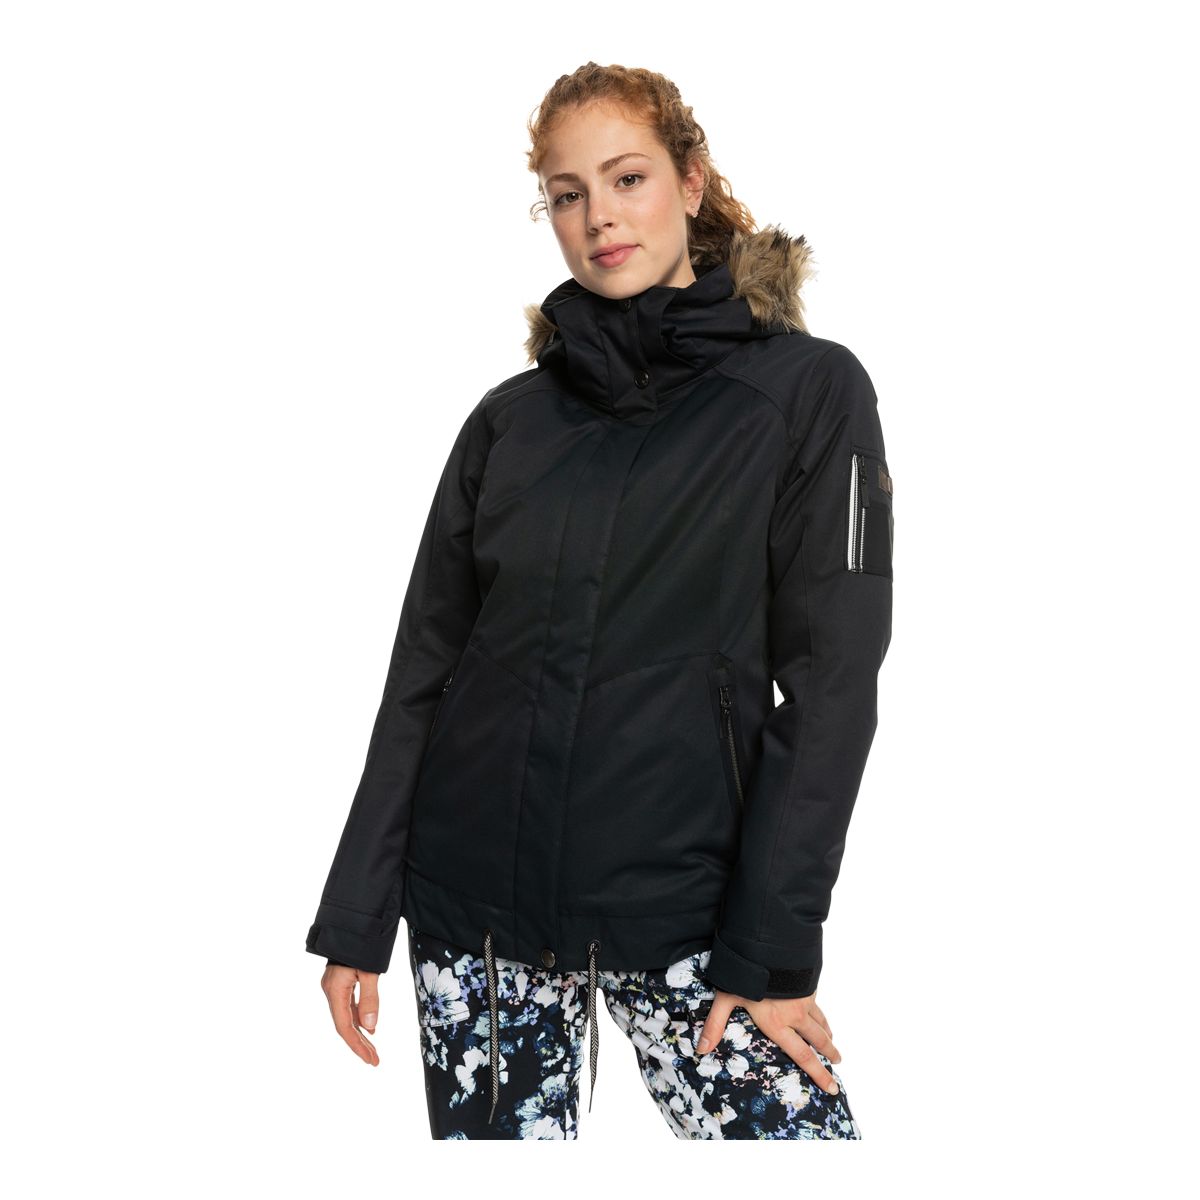 Image of Roxy Women's Meade Insulated Jacket